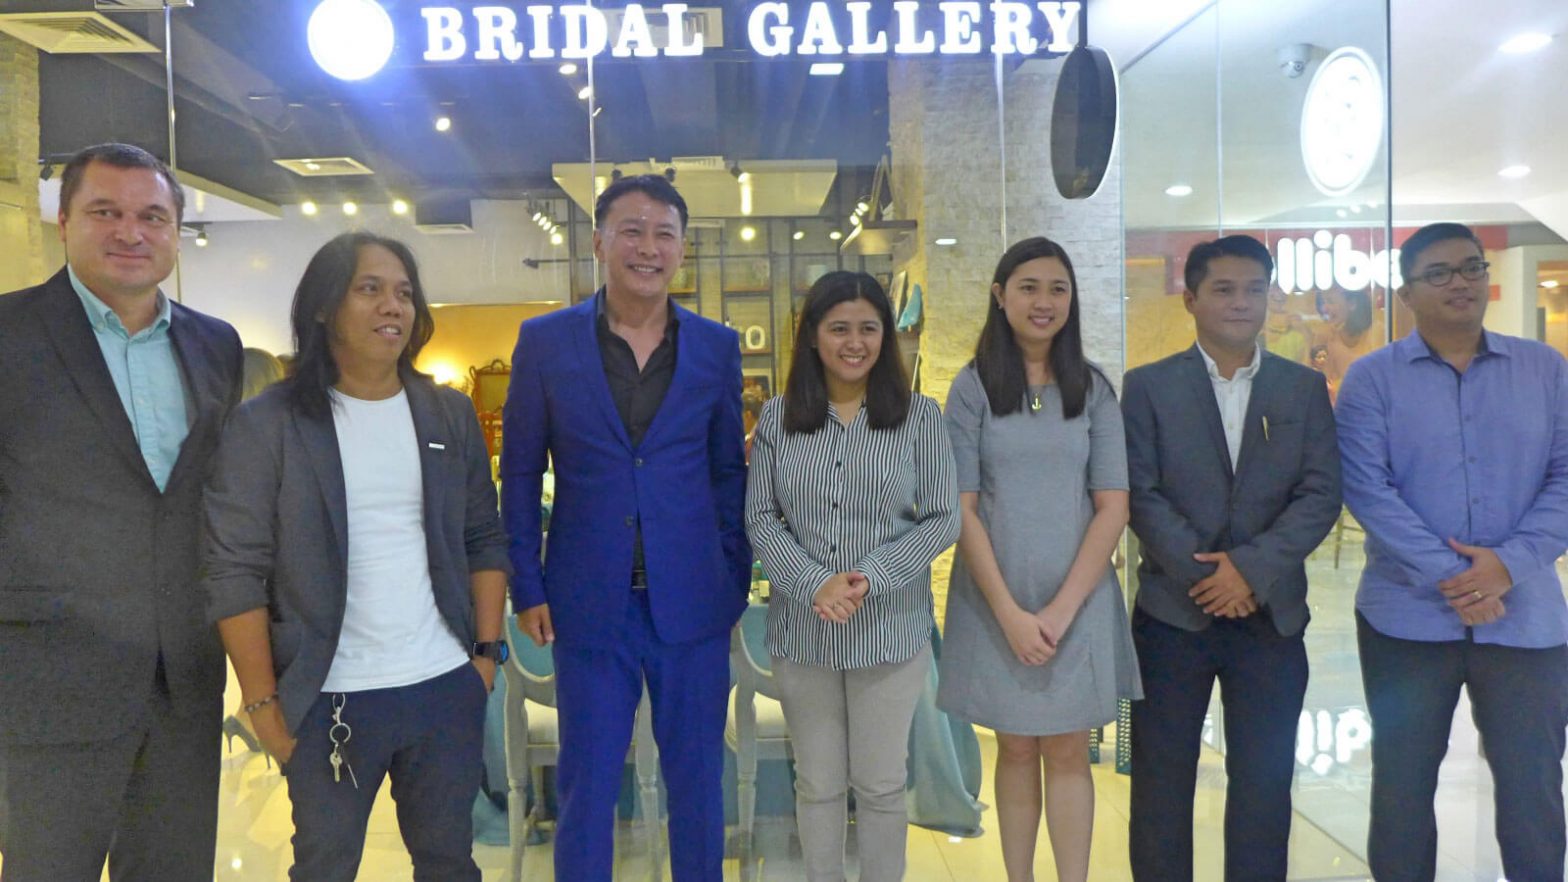 NST Pictures launches BG Bridal Gallery for ‘all things wedding’